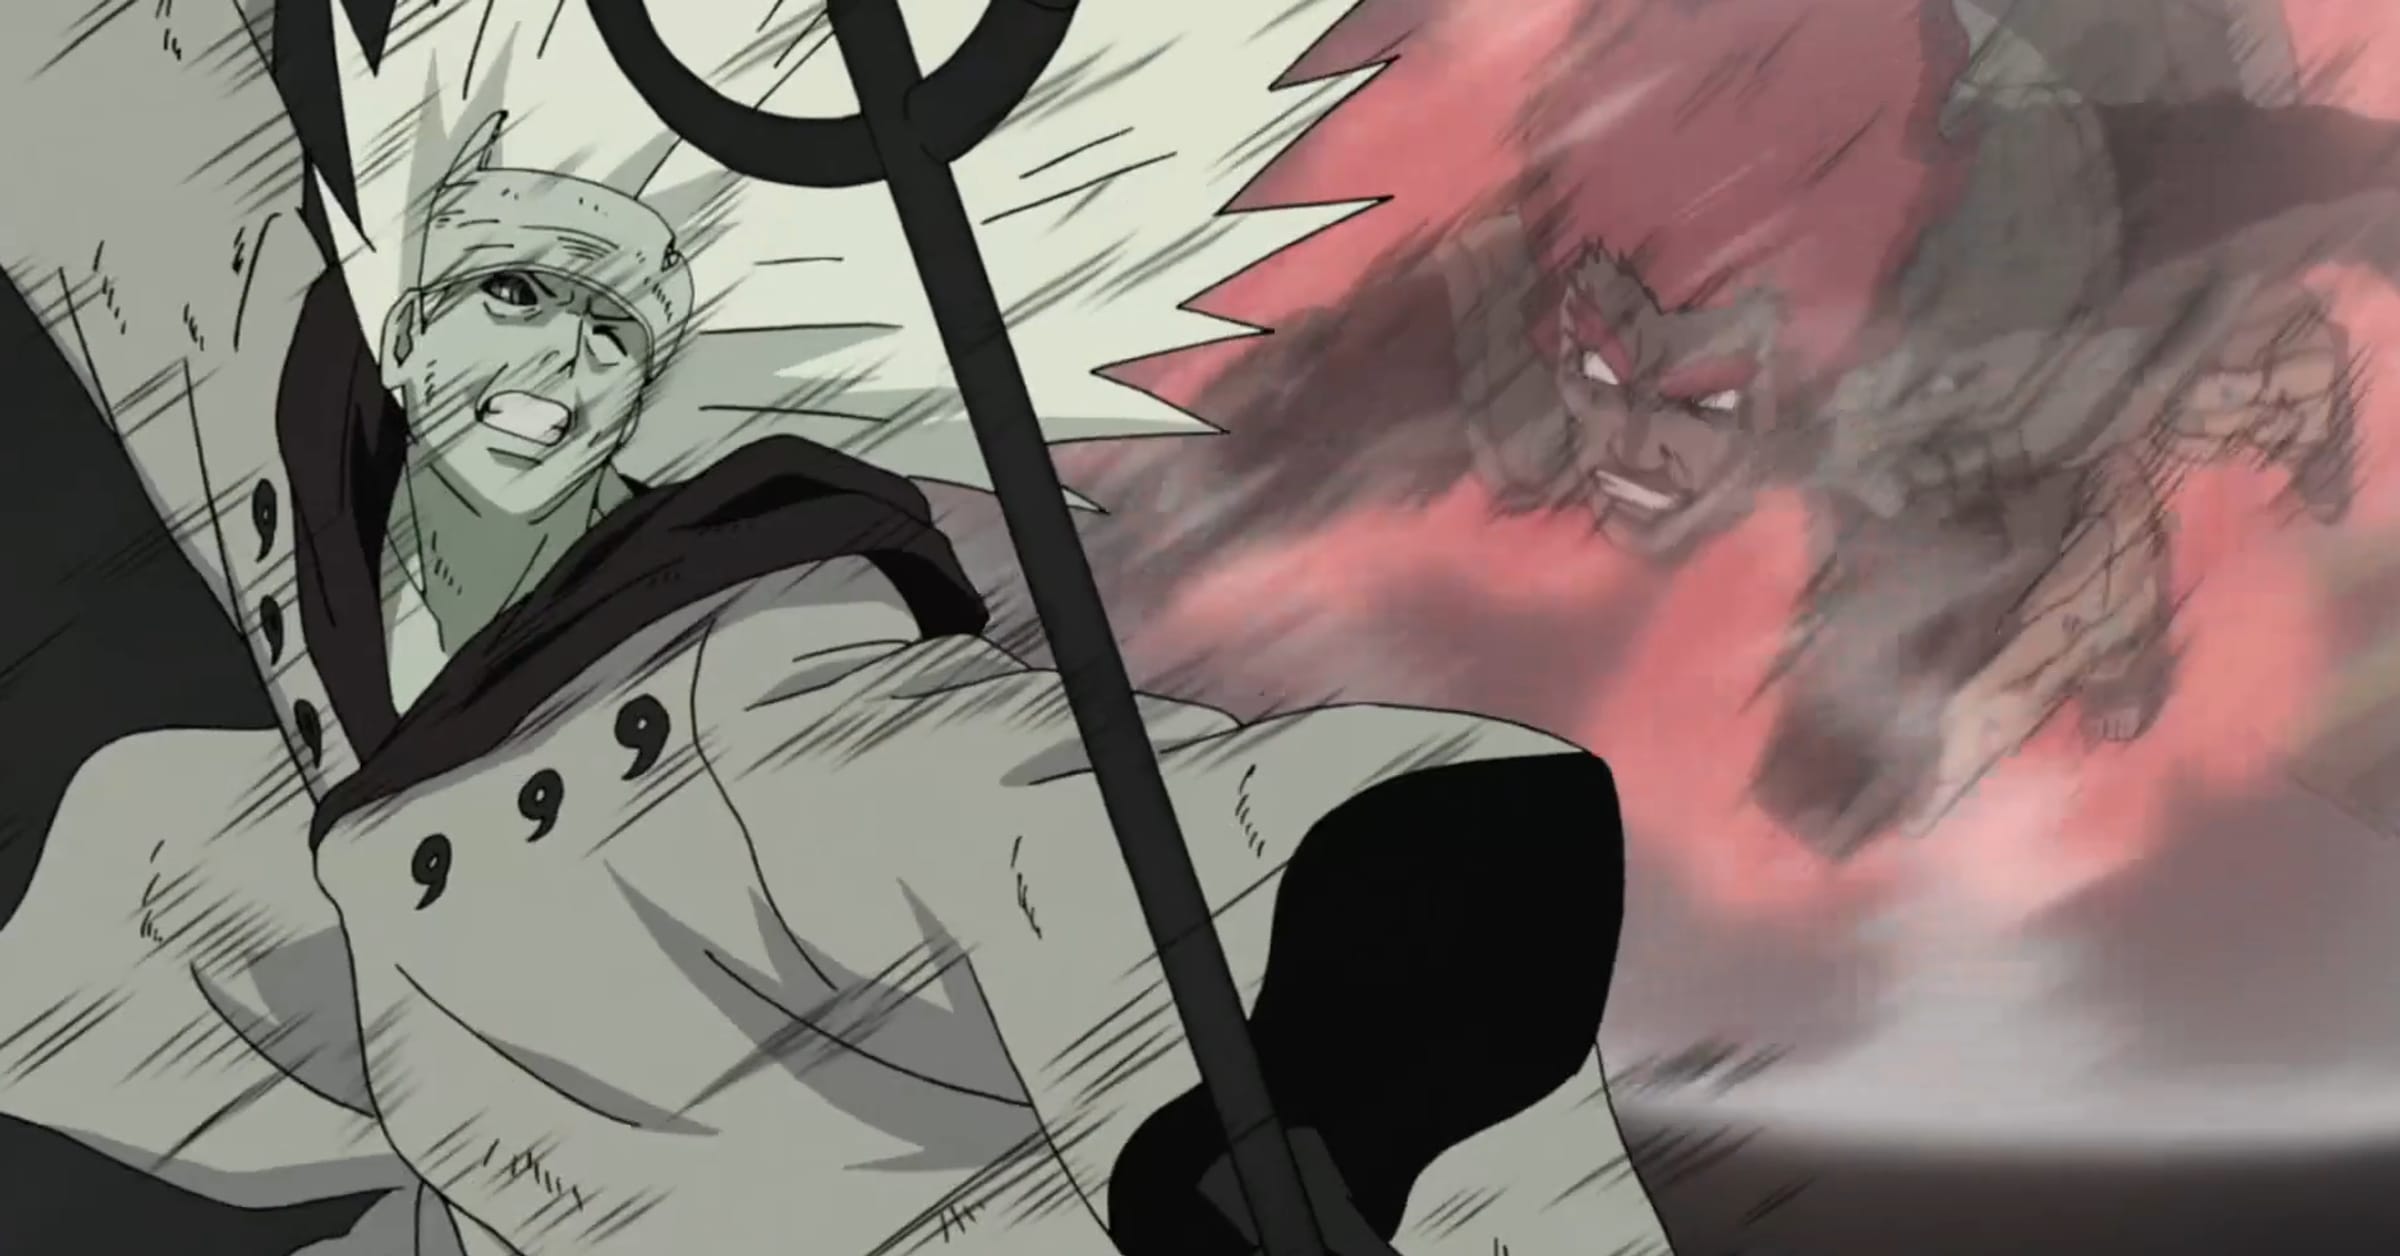 Top 10 Most Impactful Fights in Naruto 